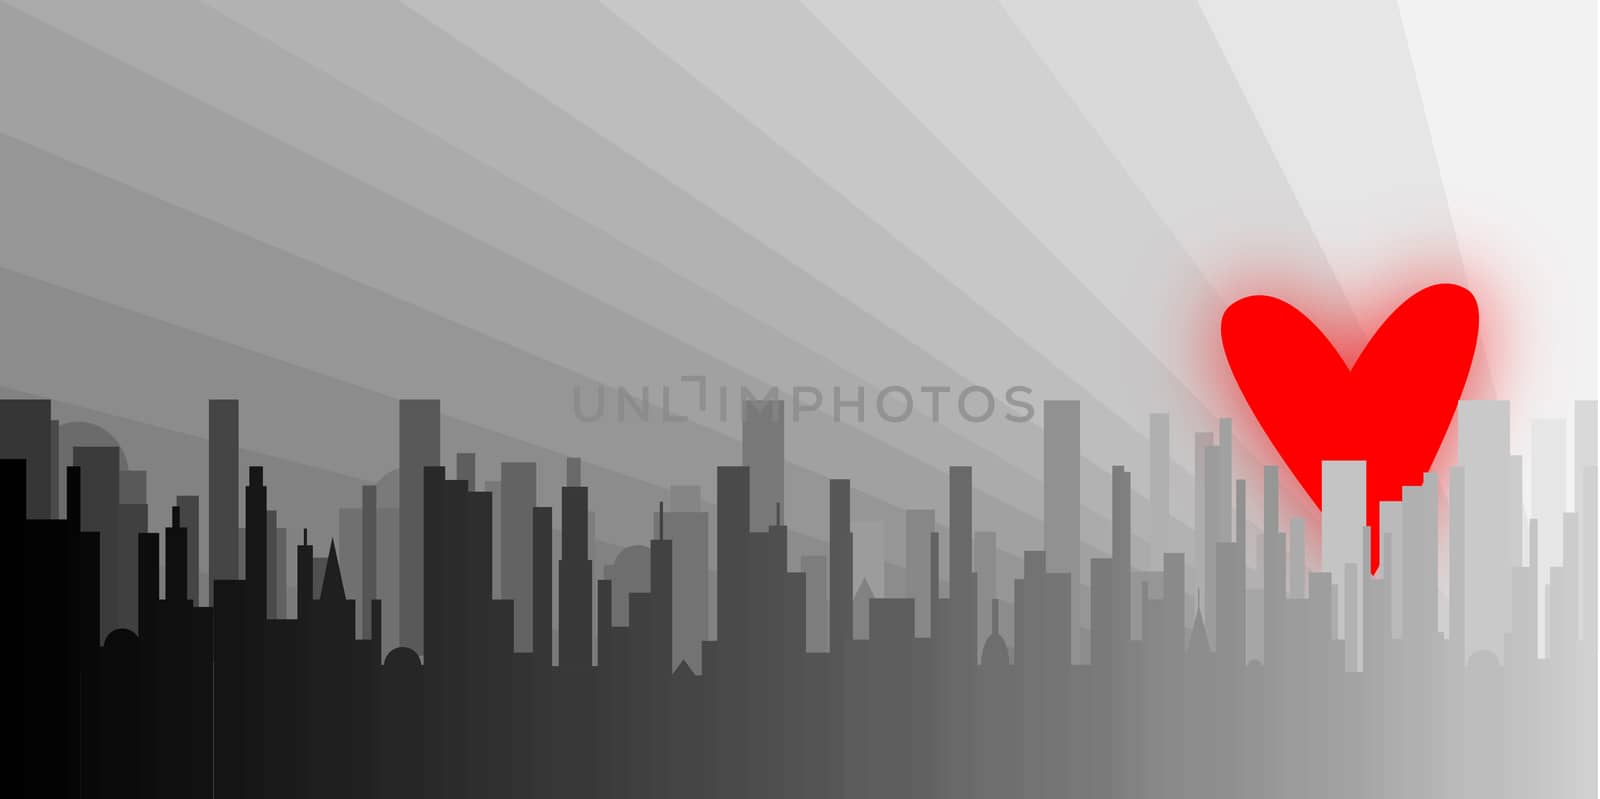 A grey cityscape shown with a rising red heart.